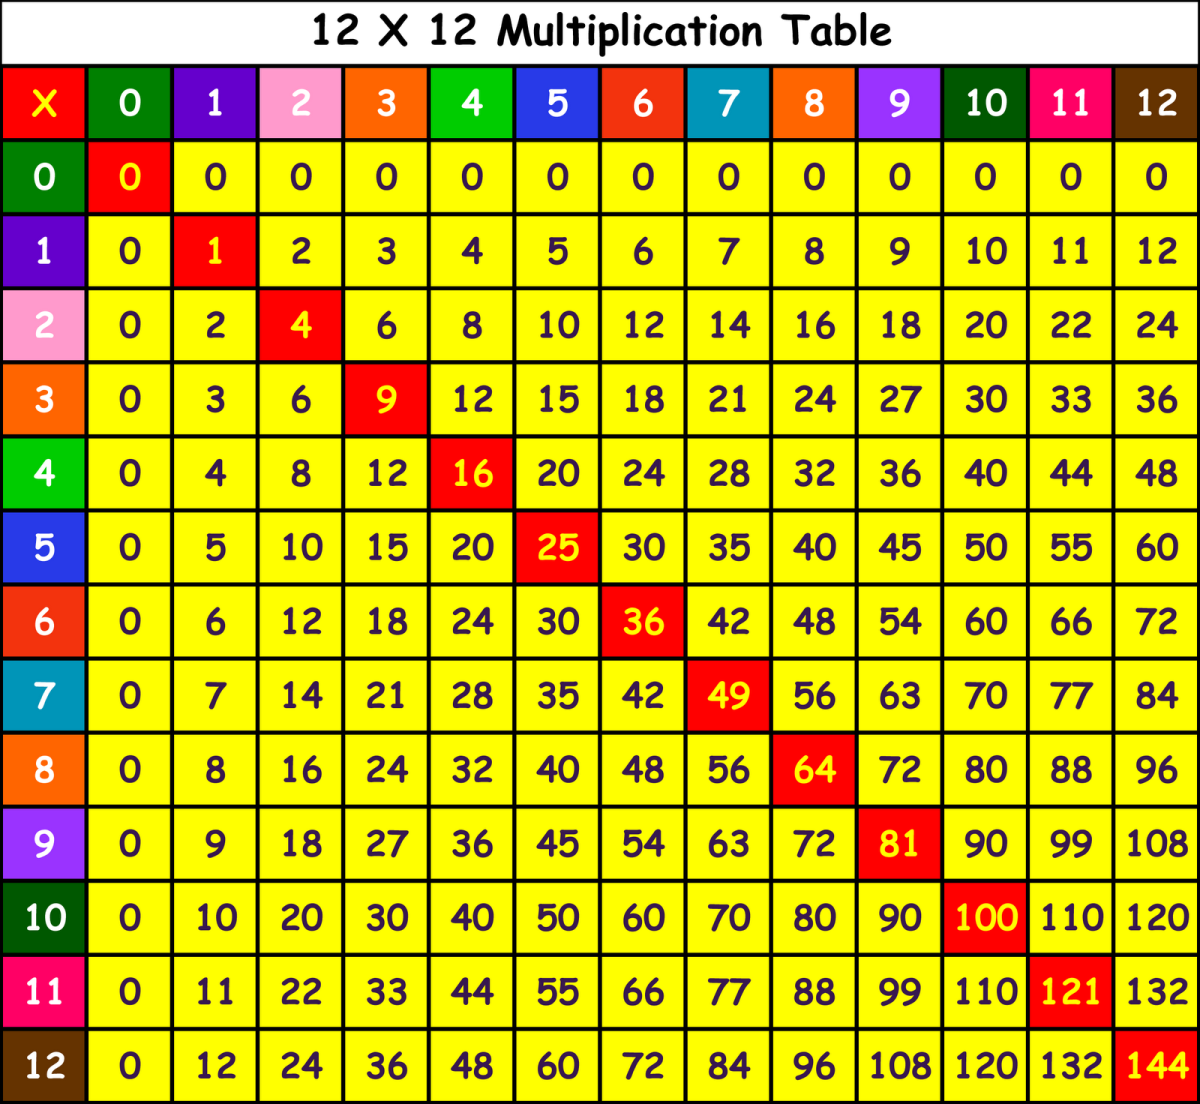 A multiplication grid. Try completing a blank multiplication grid yourself to practice, and then you can check your answers here.